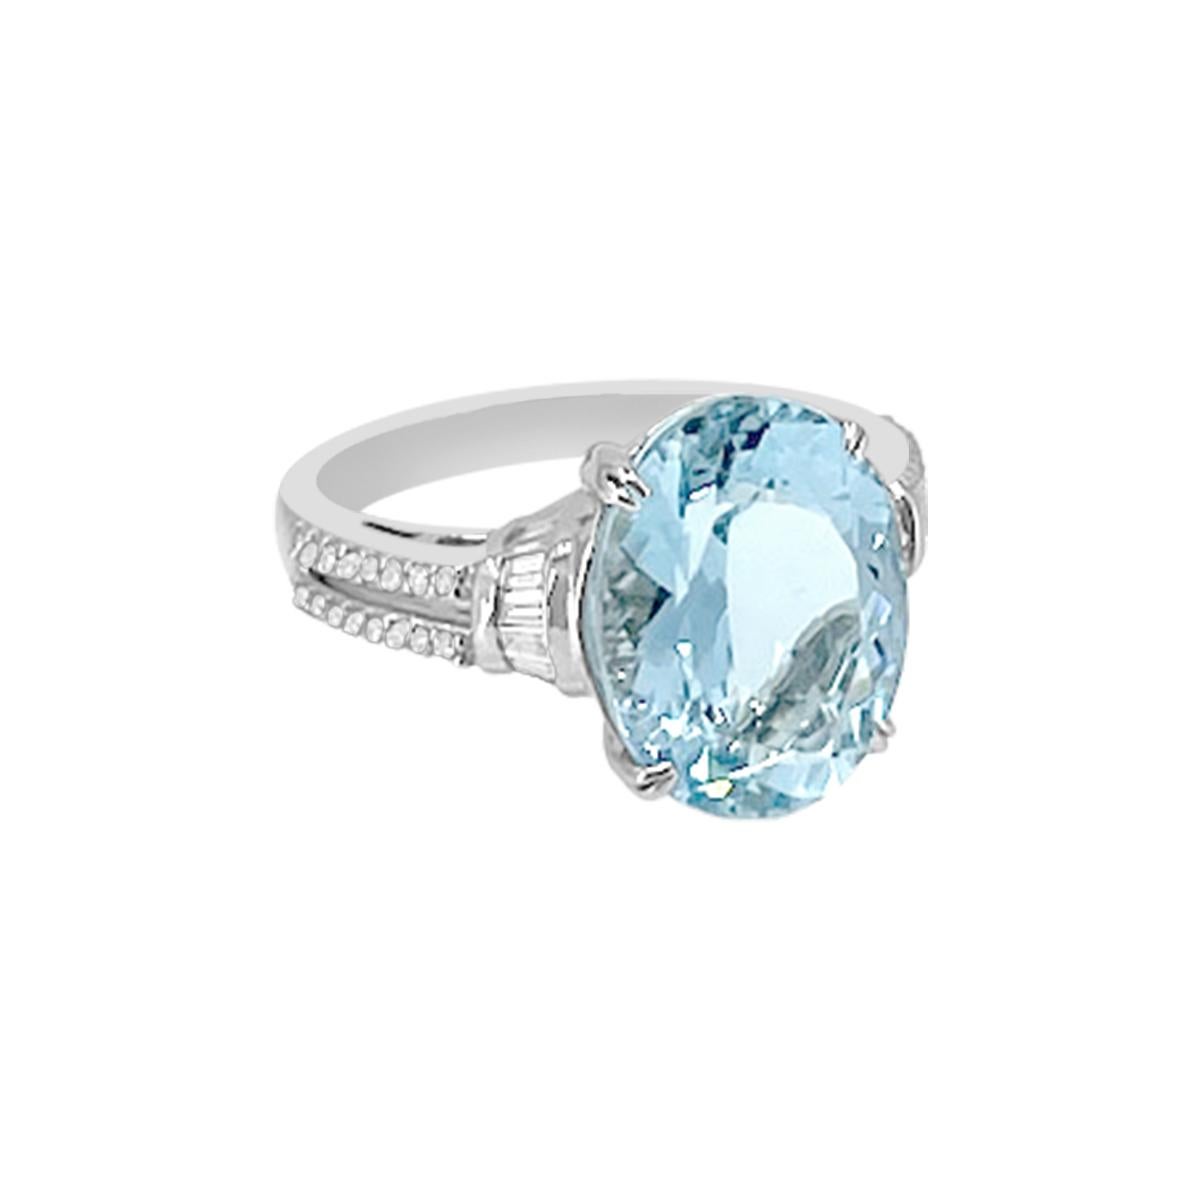 This Beautiful Ring with Aquamrine Oval as its center is a perfect gift. Aquamarine is a color of love and goodluck. The Aquamarine has a nice rich blue color with a fine cut.

Style# 3583
Aquamarine: Oval 13.5x10.5mm 5.56cts
Diamonds: 50pcs 0.40cts